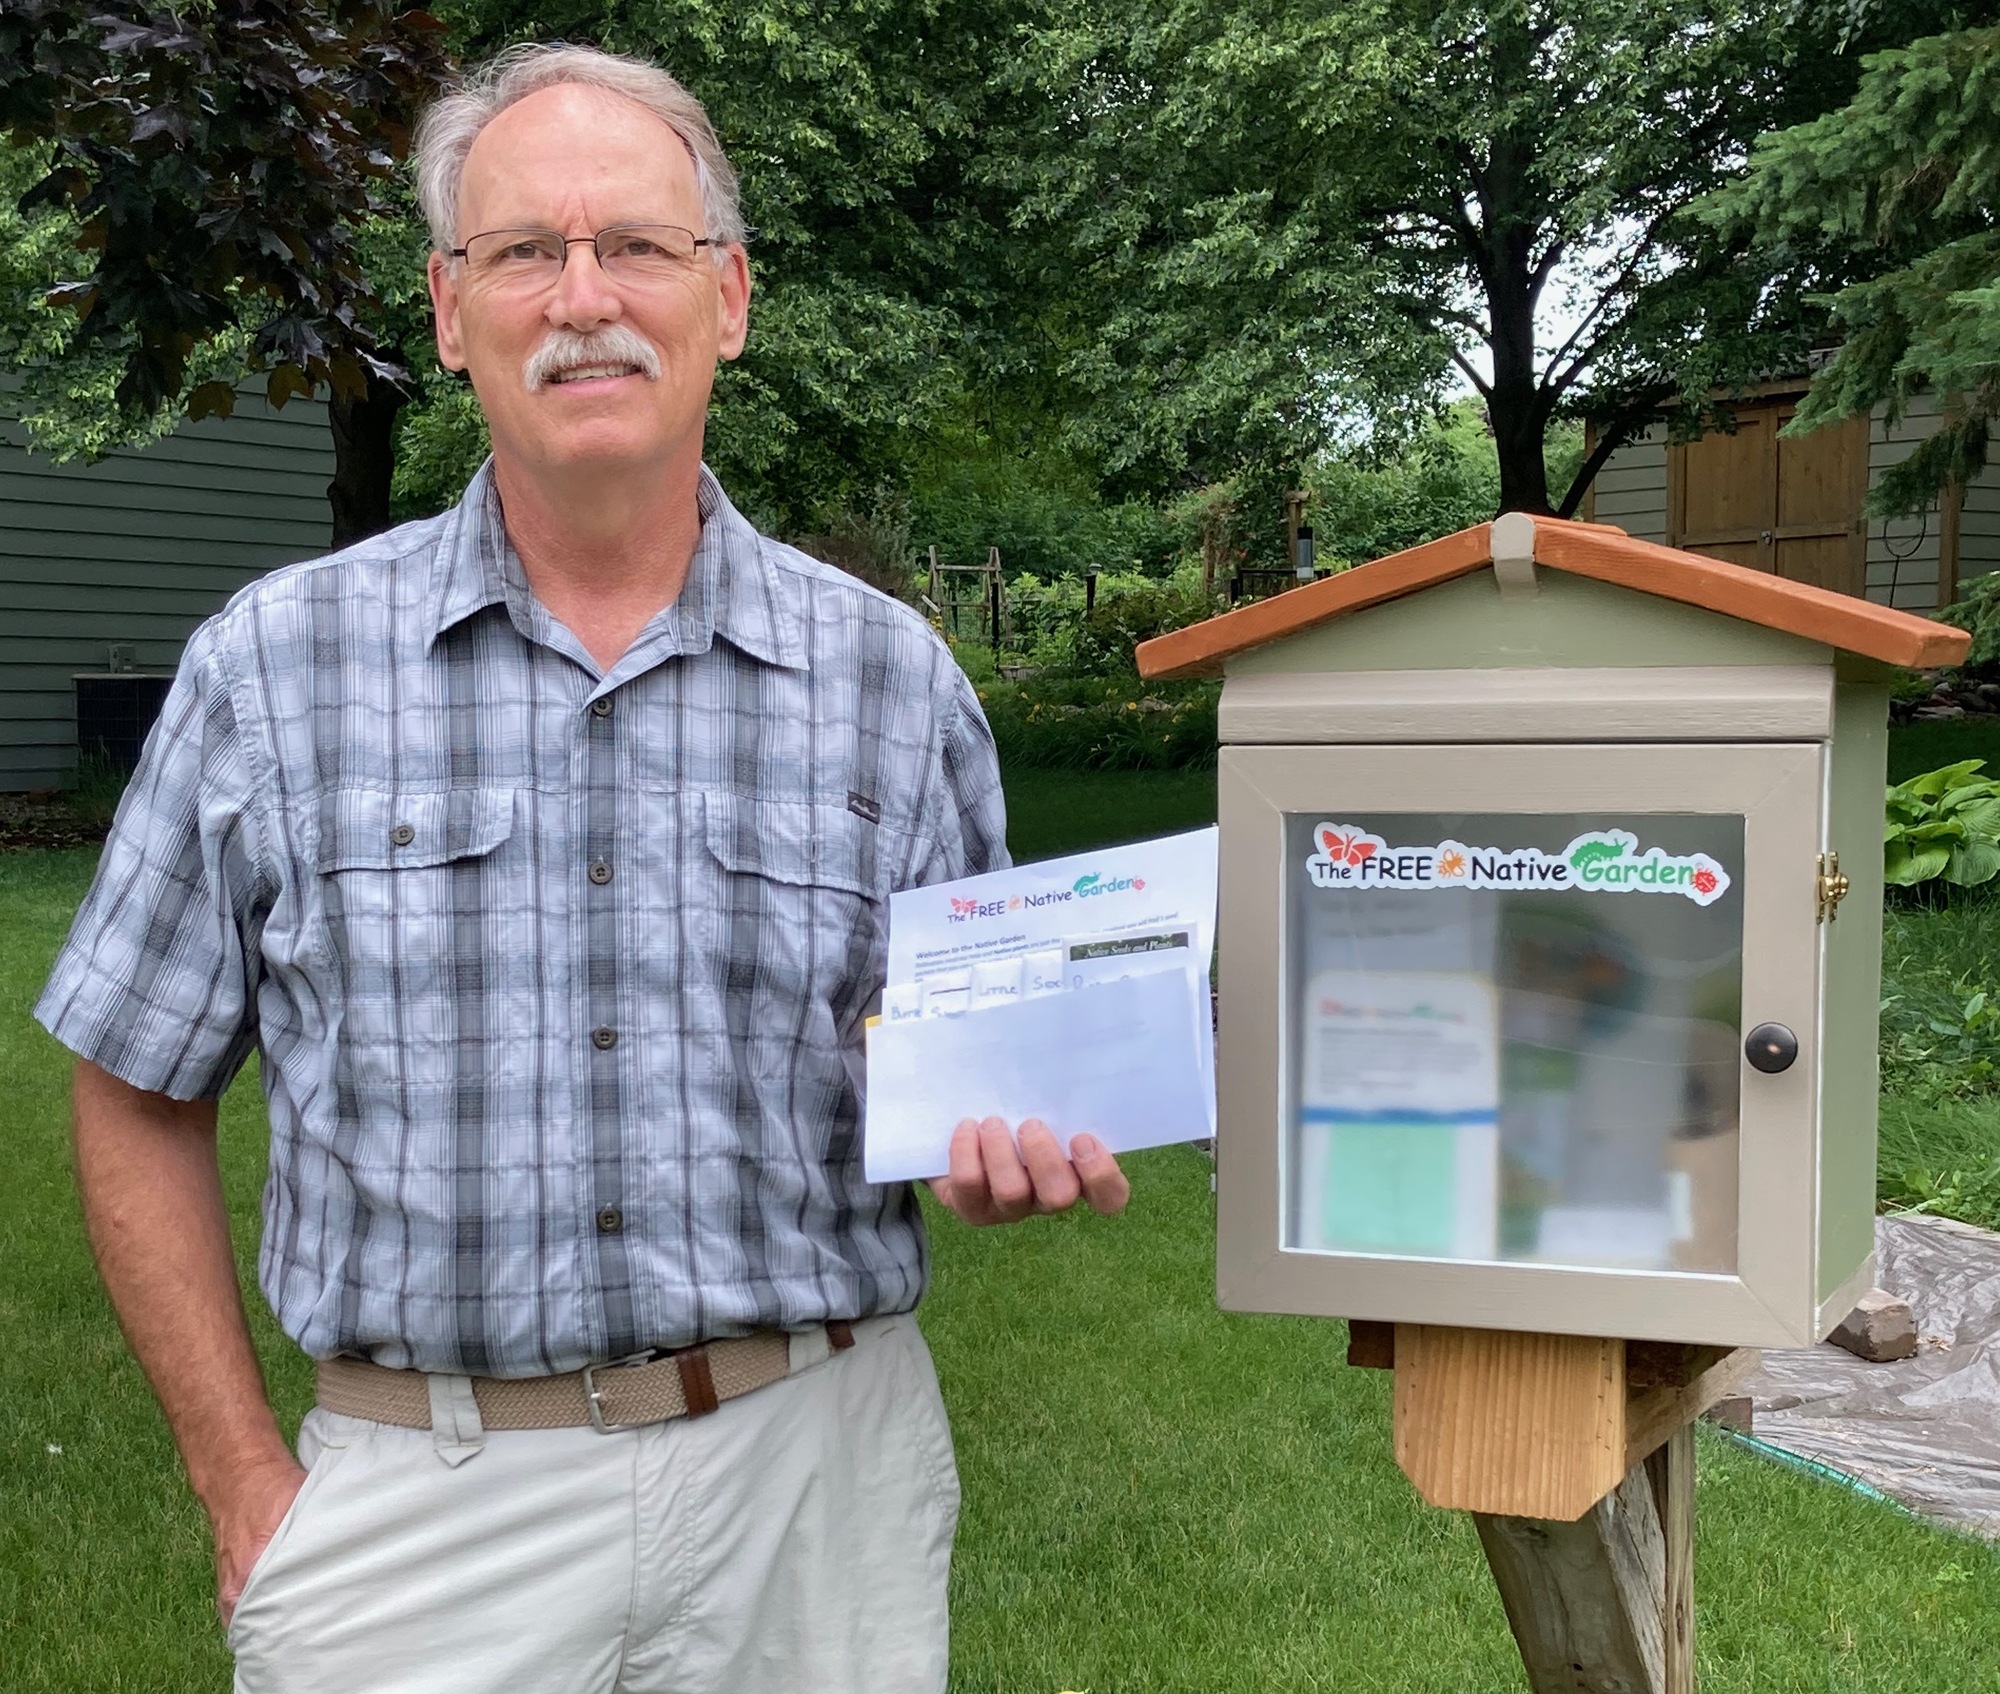 Jon Peschman stood by a Little Free Library that he constructed to give away seed packets of native plants.